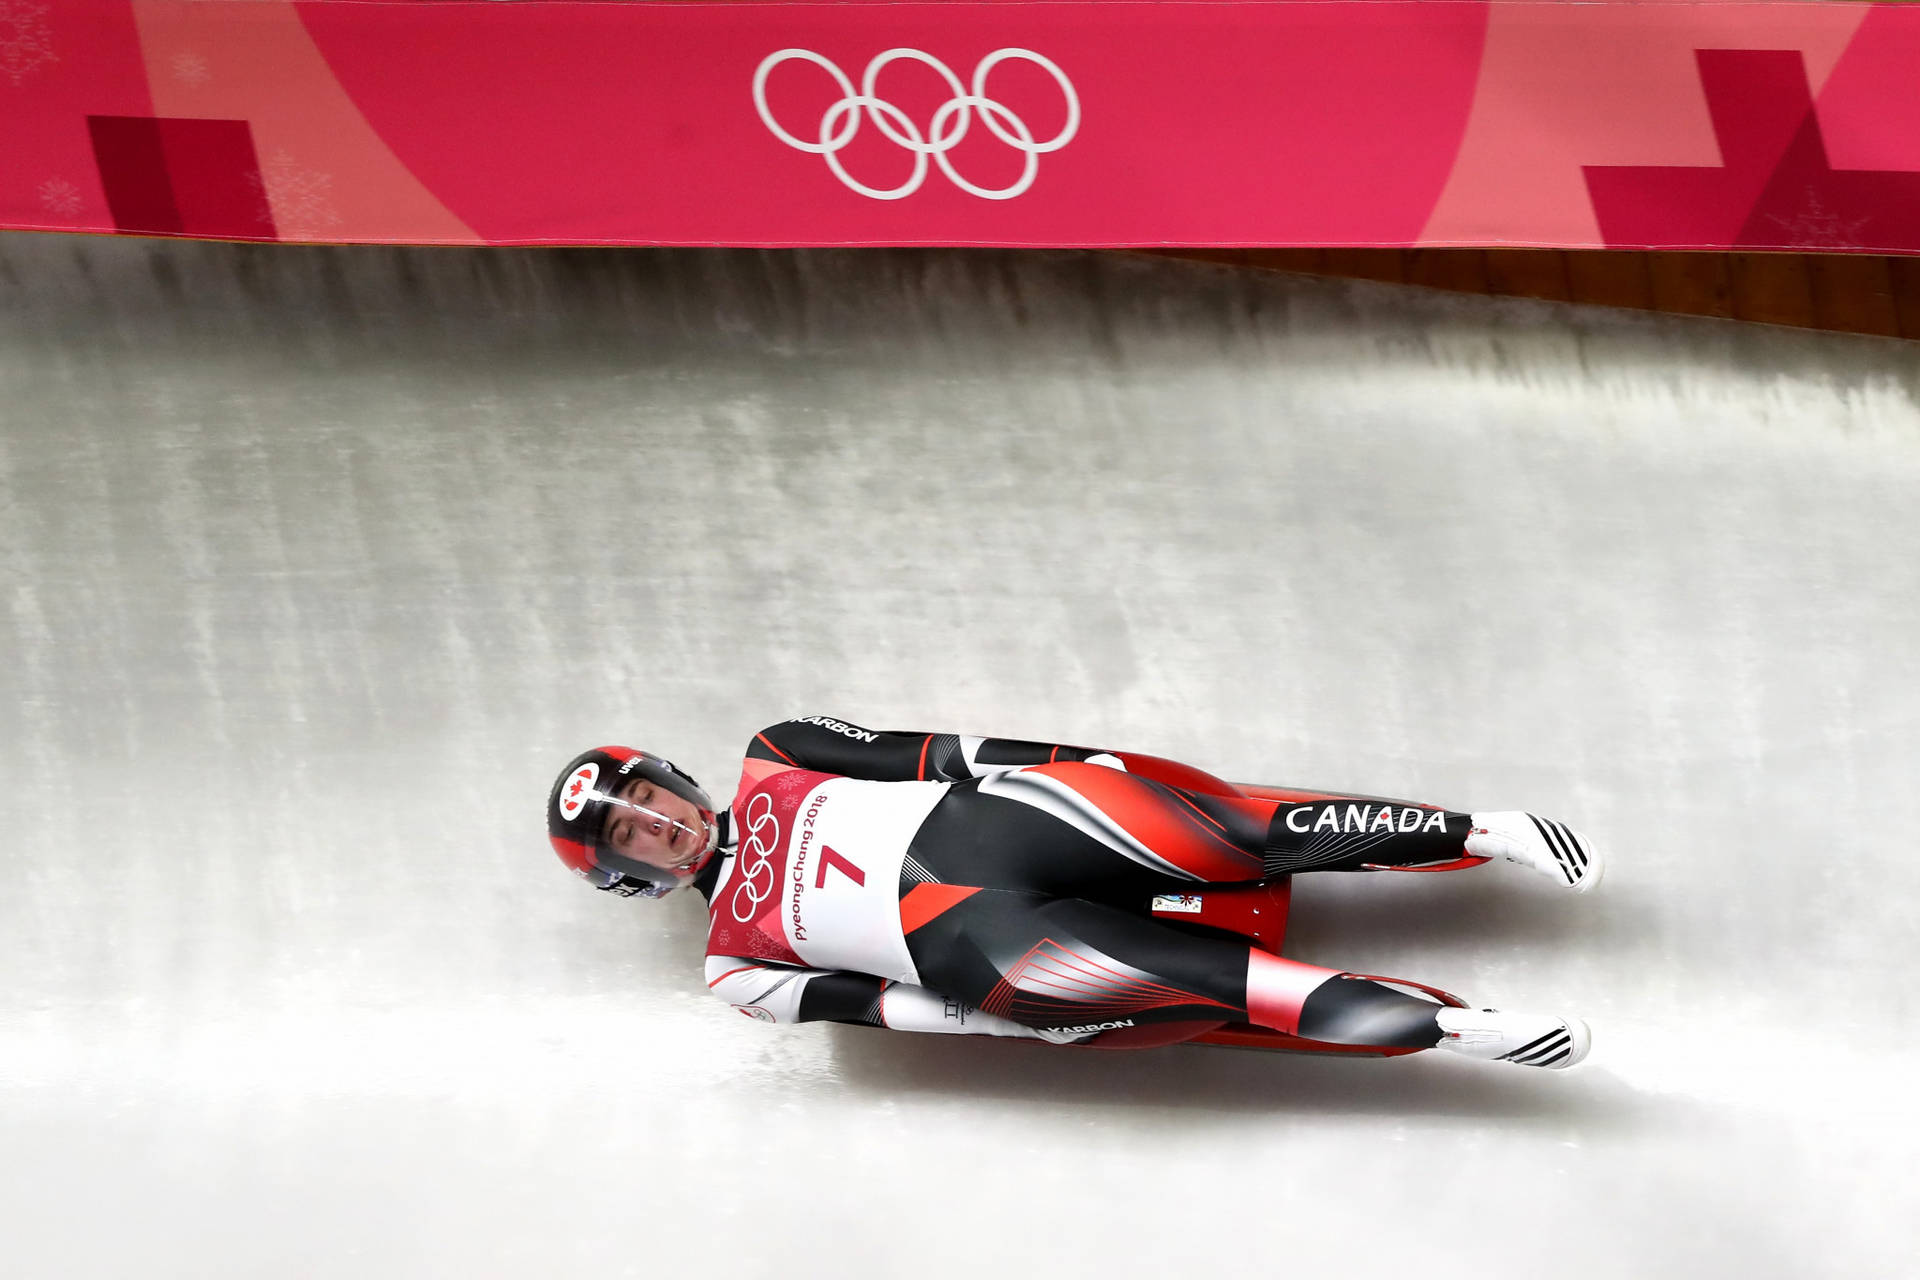 Canada Luge Team In Winter Olympics Background